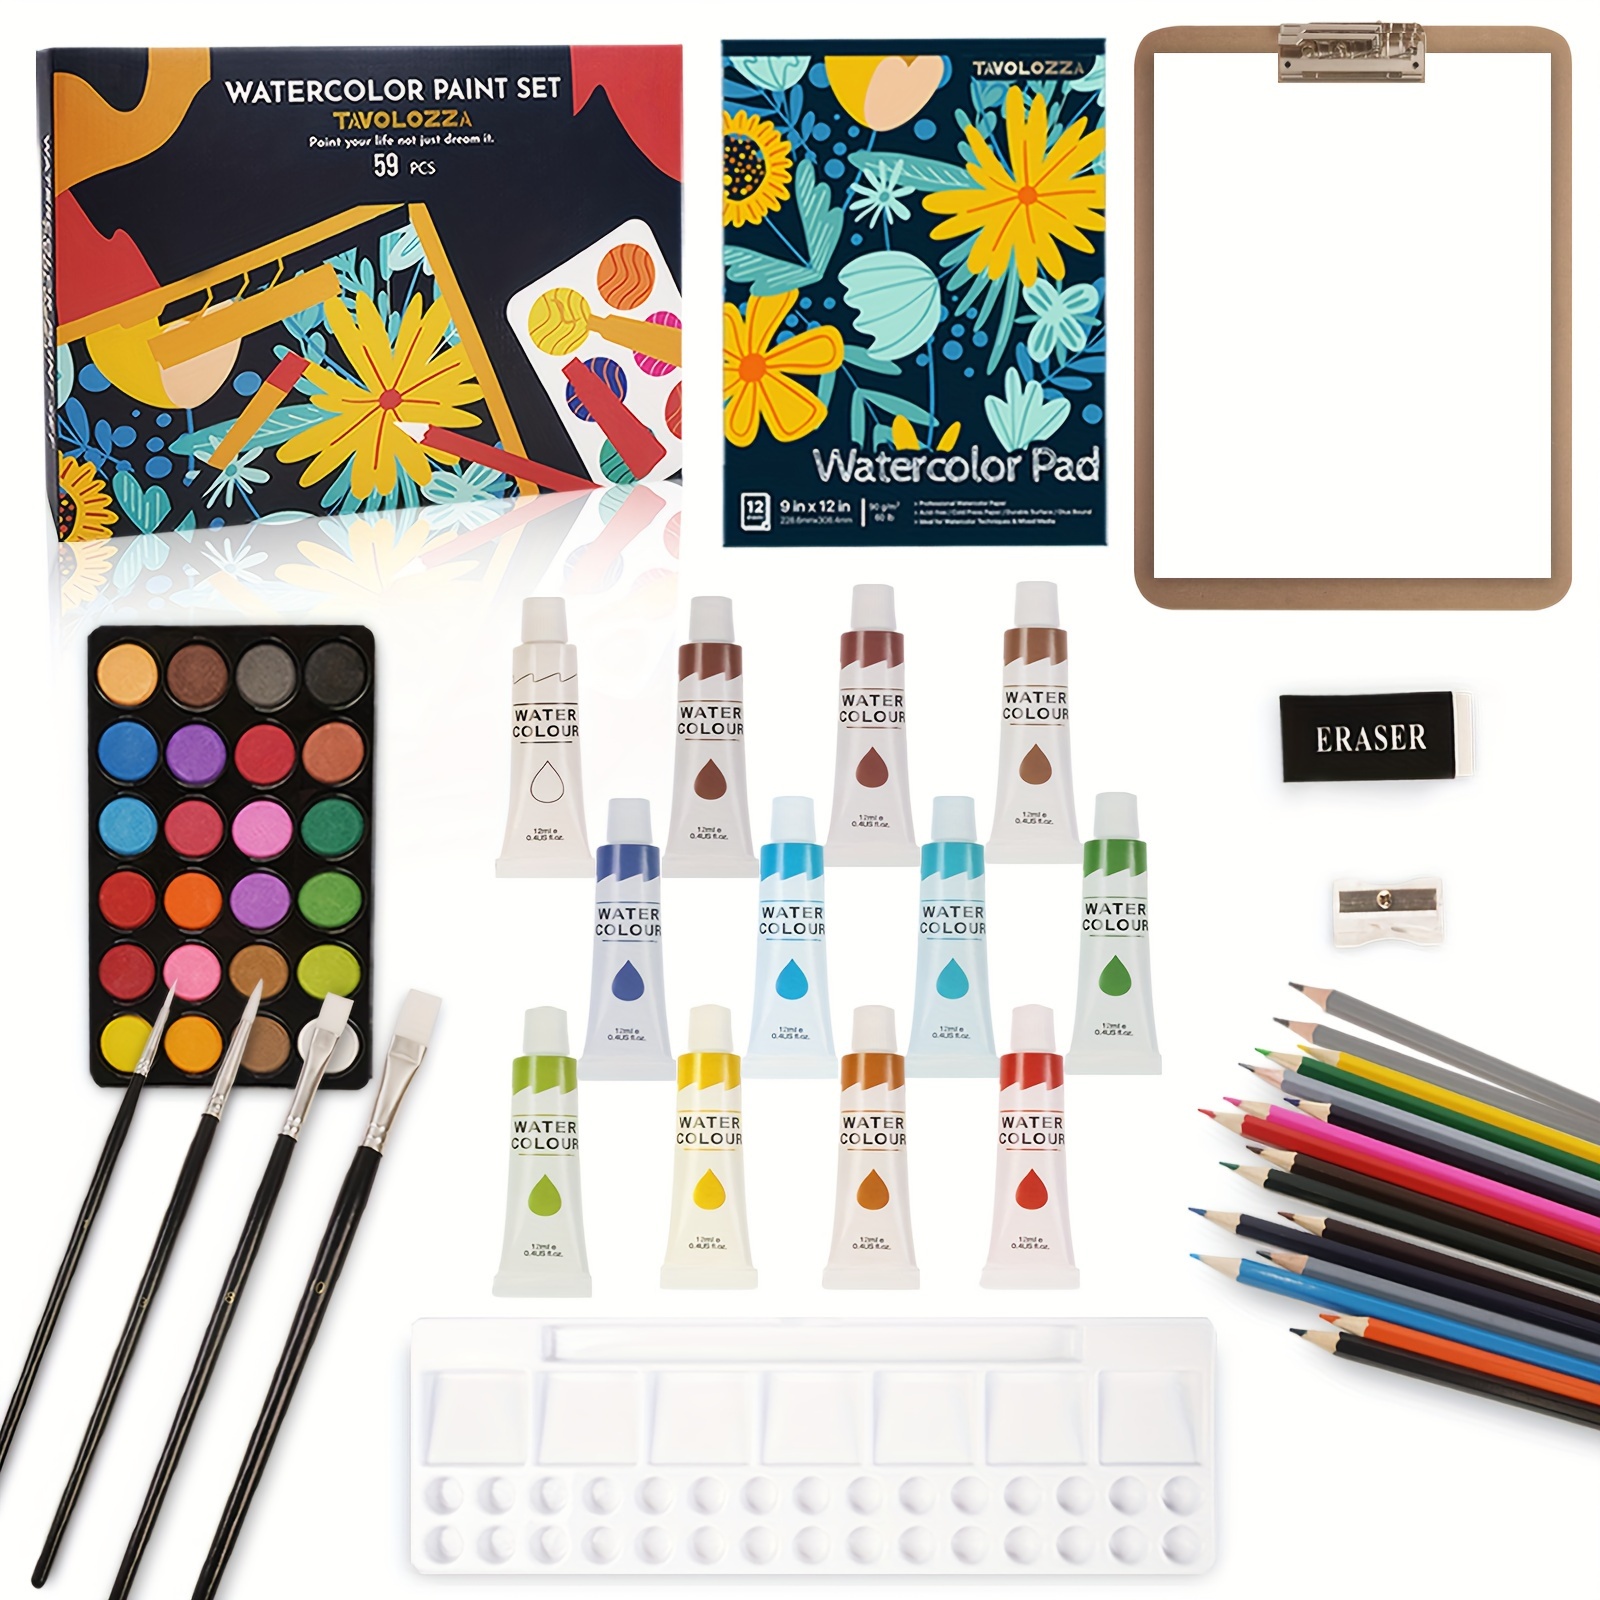 59pcs Watercolor Paint Set For Adult Beginner Artists, Art Painting Supply  Kit, Shop Now For Limited-time Deals